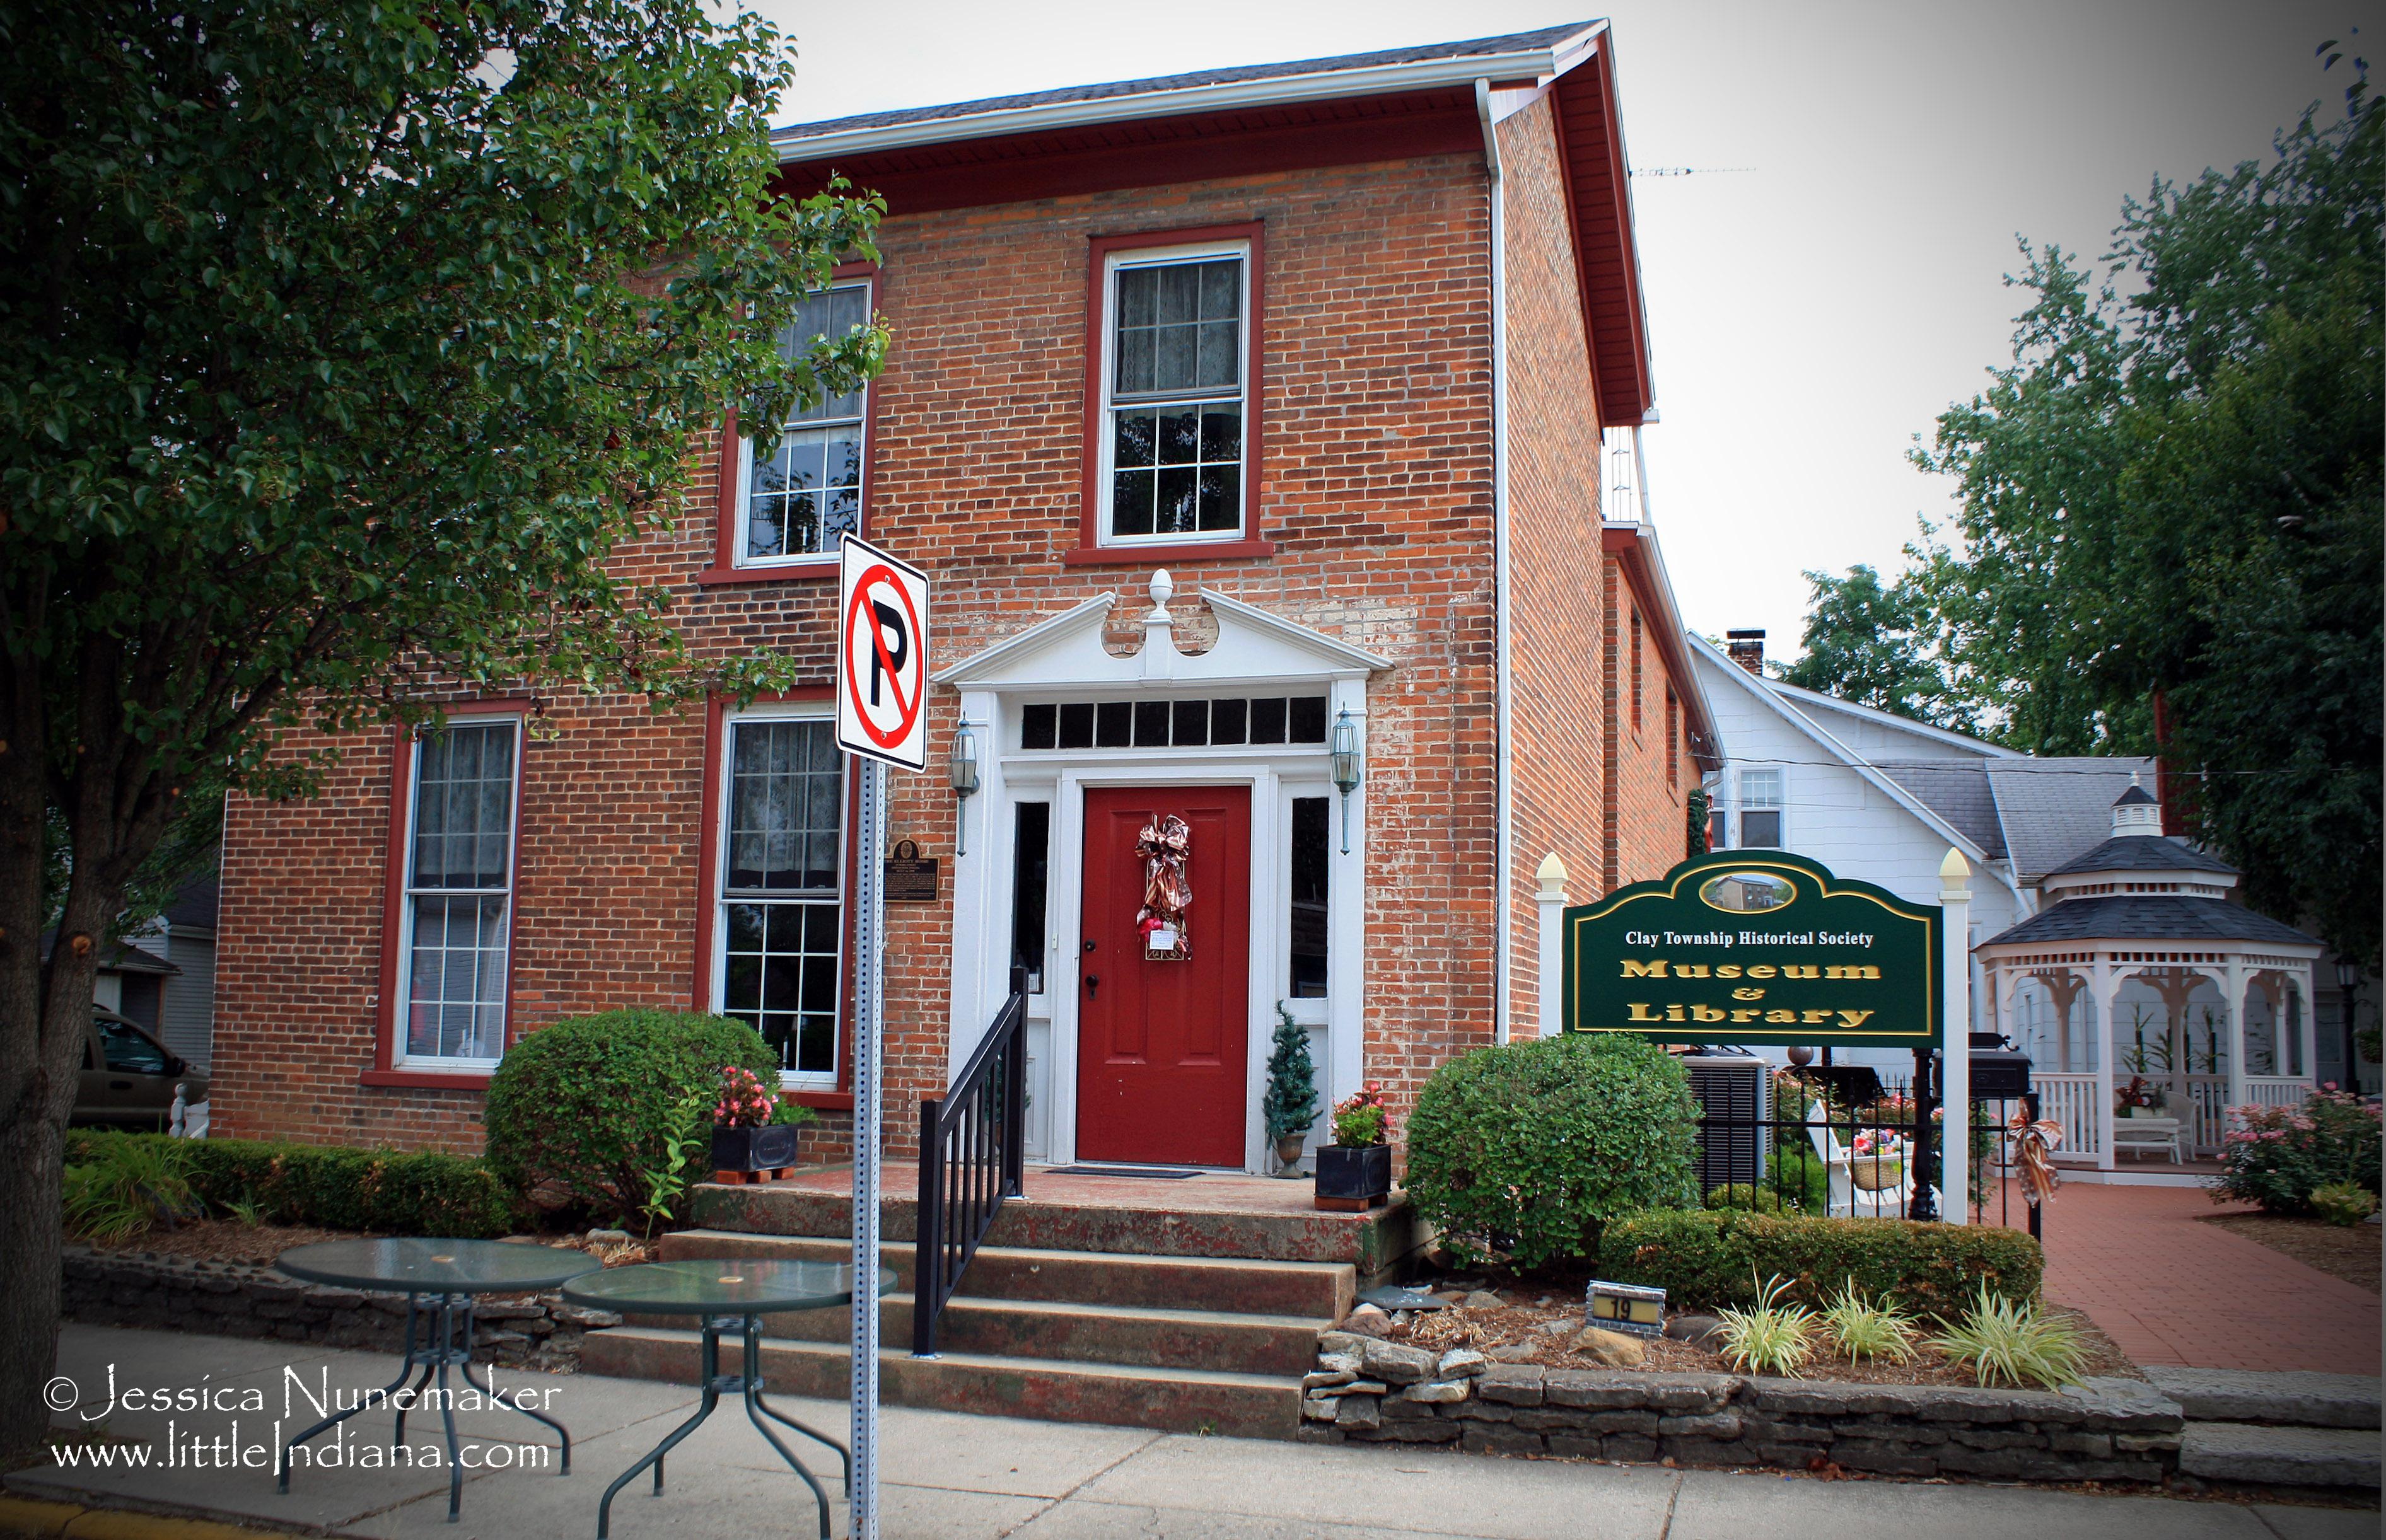 Greens Fork, Indiana: Clay Township Historical Museum